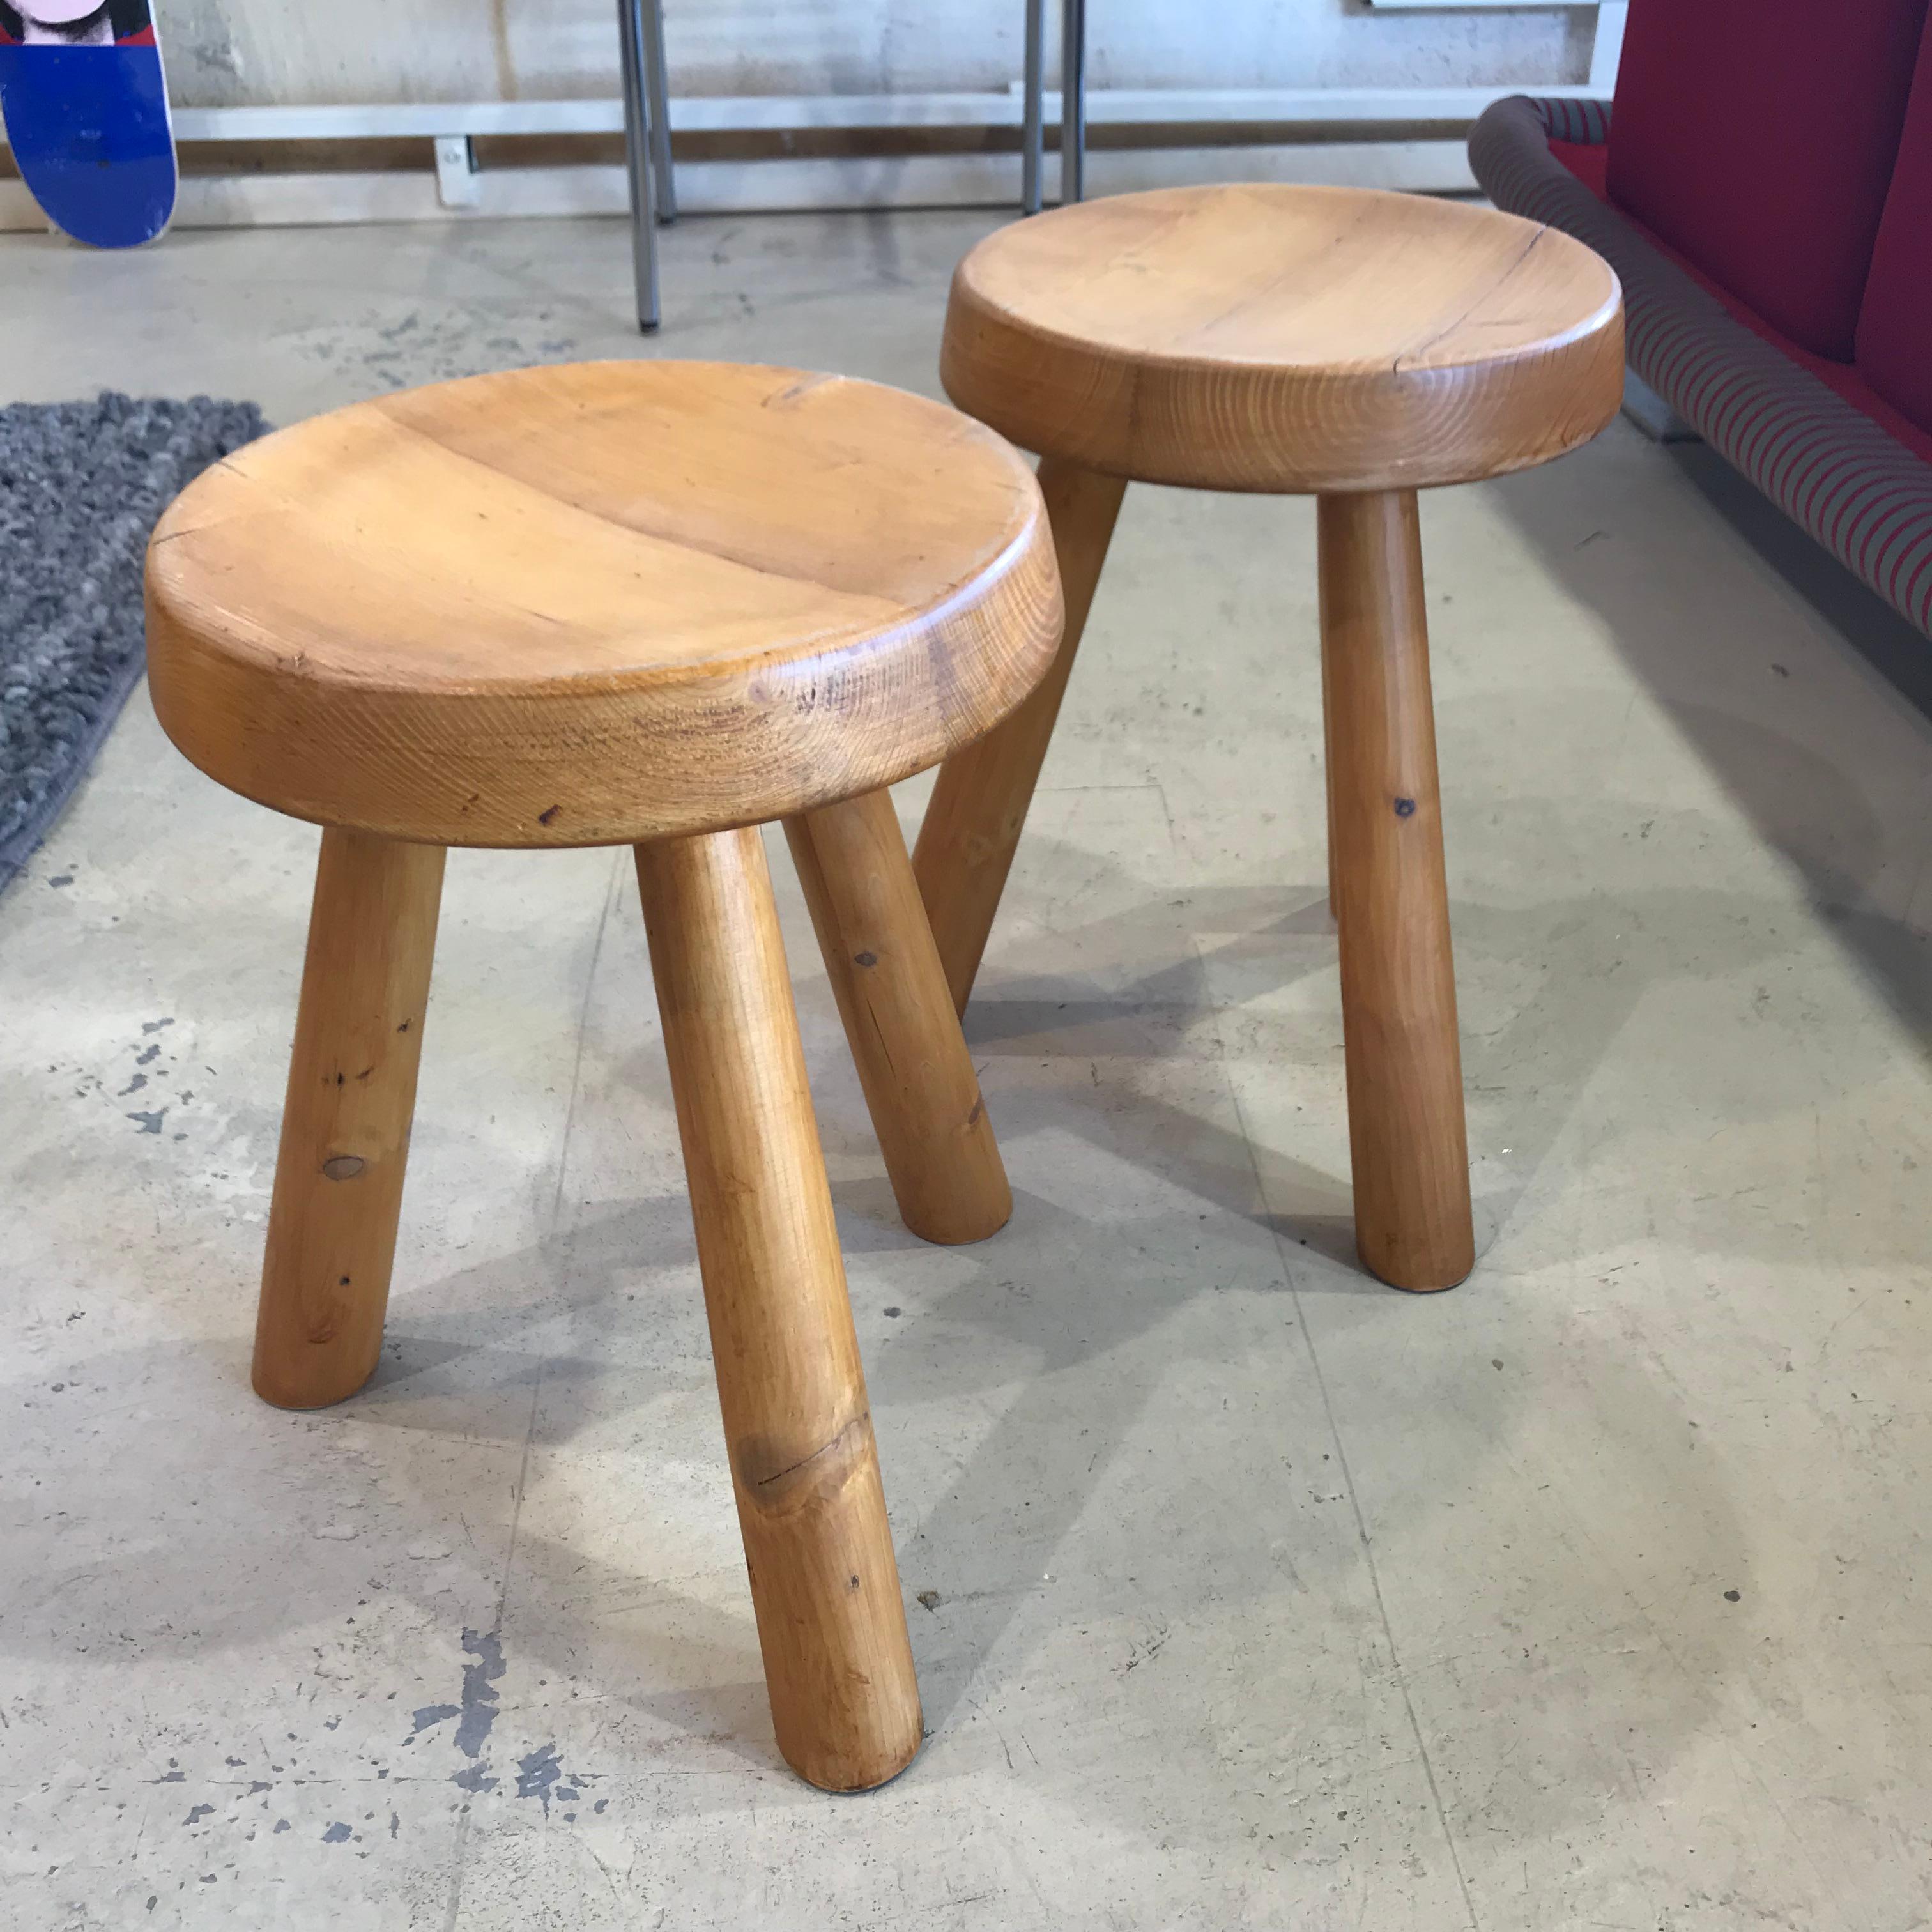 Charlotte Perriand's Stools 